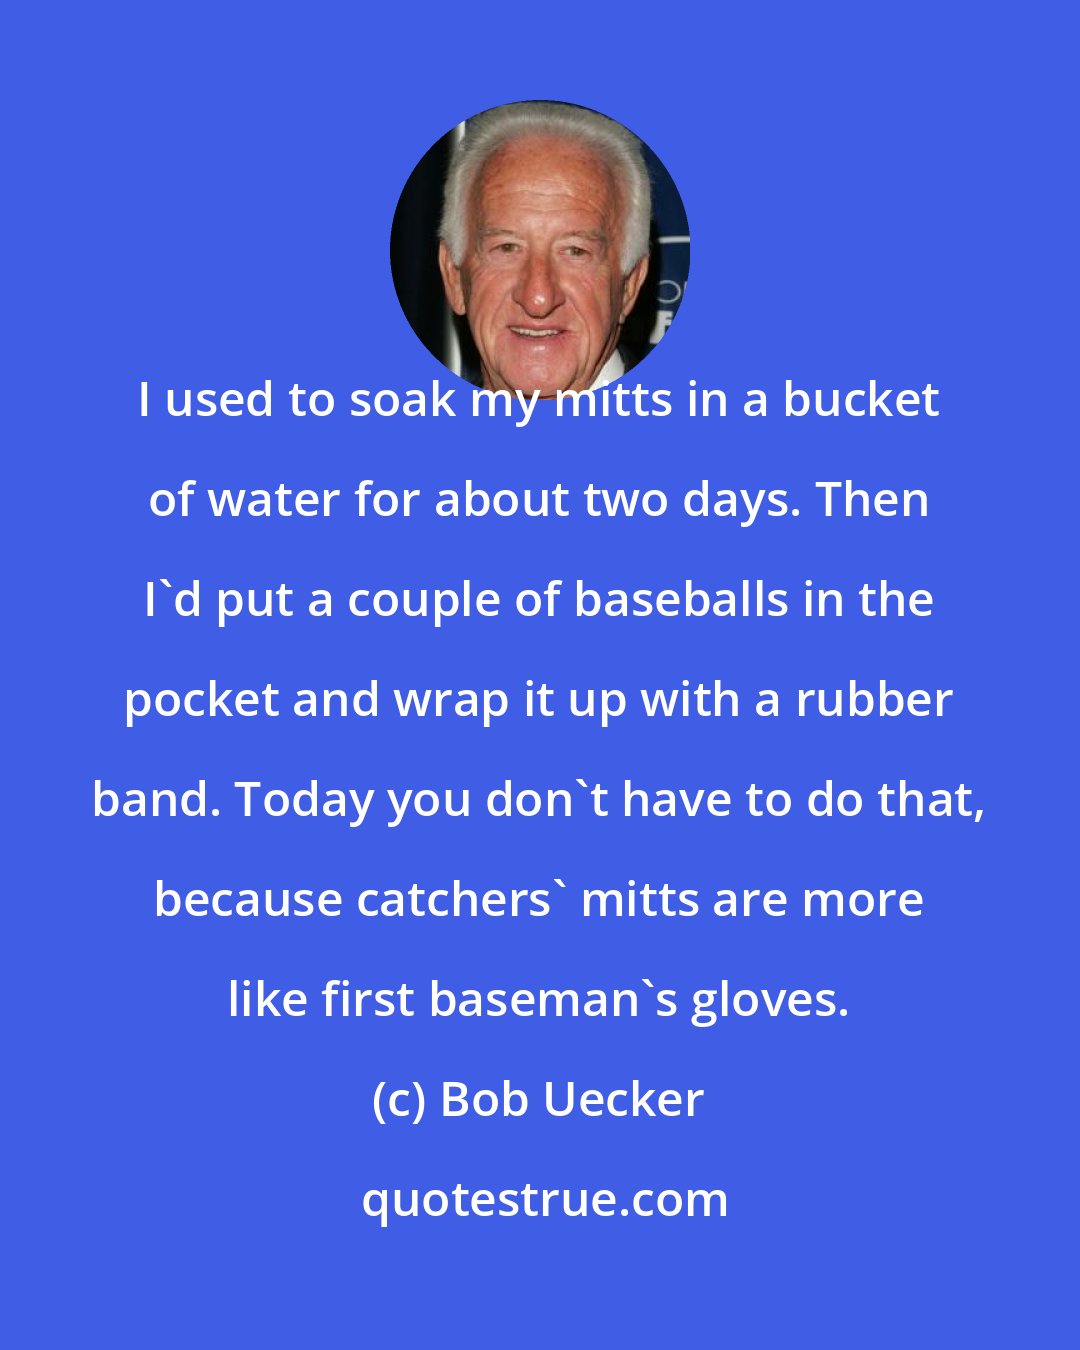 Bob Uecker: I used to soak my mitts in a bucket of water for about two days. Then I'd put a couple of baseballs in the pocket and wrap it up with a rubber band. Today you don't have to do that, because catchers' mitts are more like first baseman's gloves.